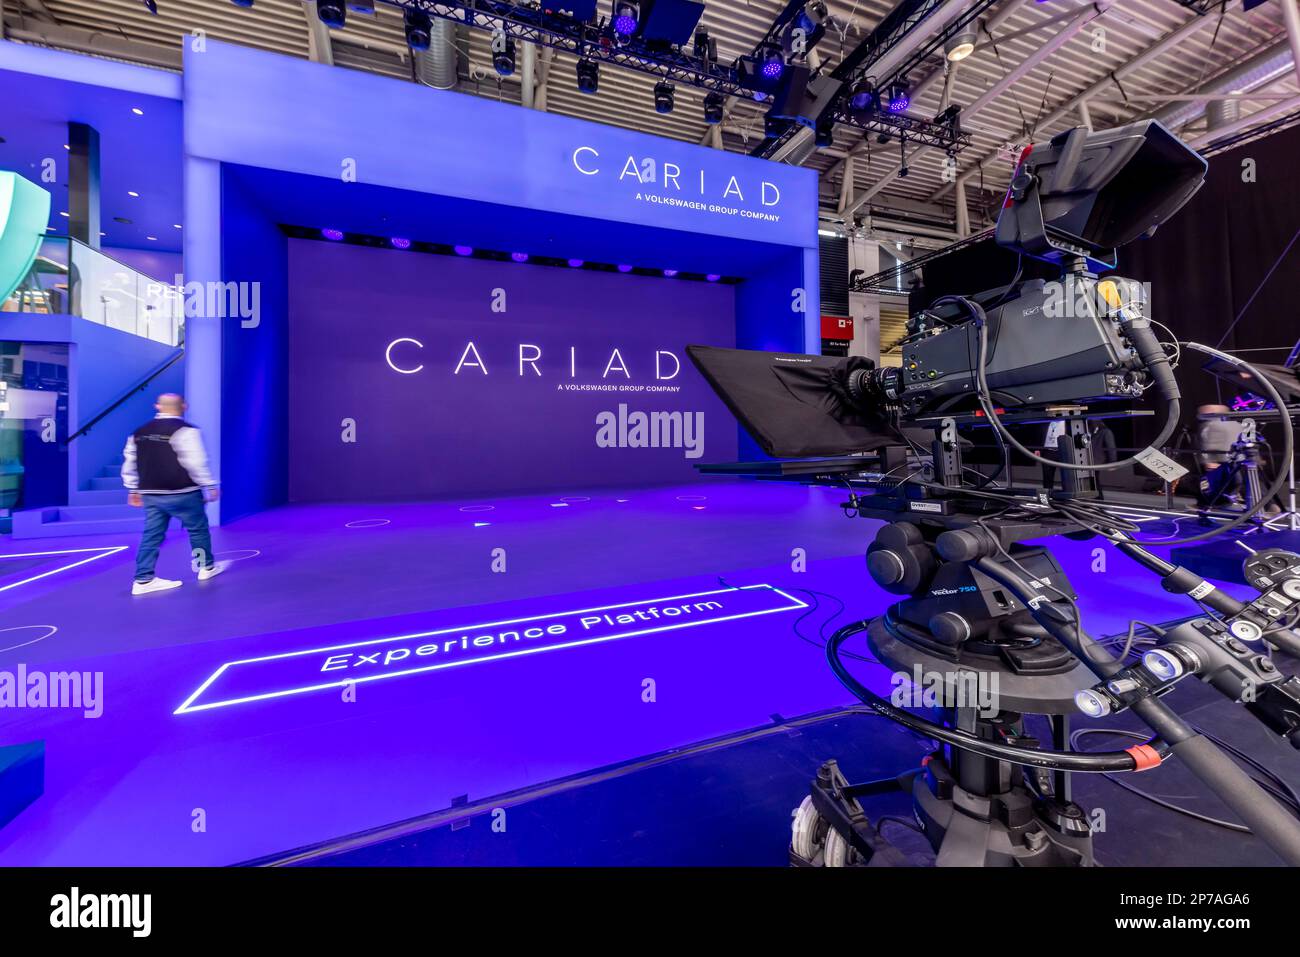 CARIAD – Automotive Software for Volkswagen